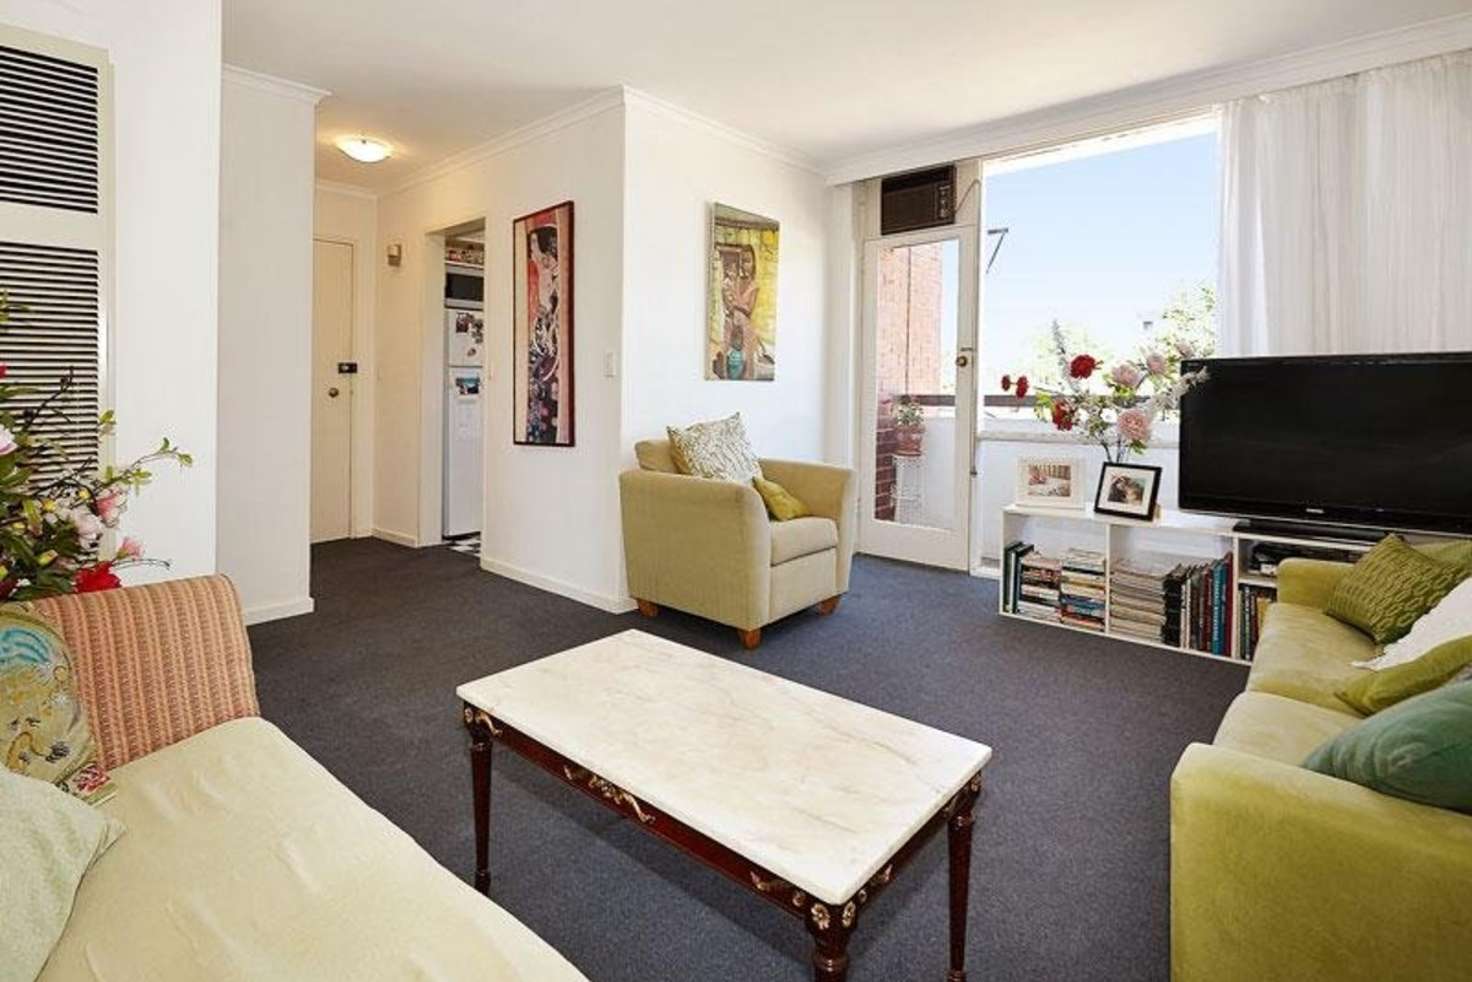 Main view of Homely apartment listing, 13/7 Curran Street, North Melbourne VIC 3051